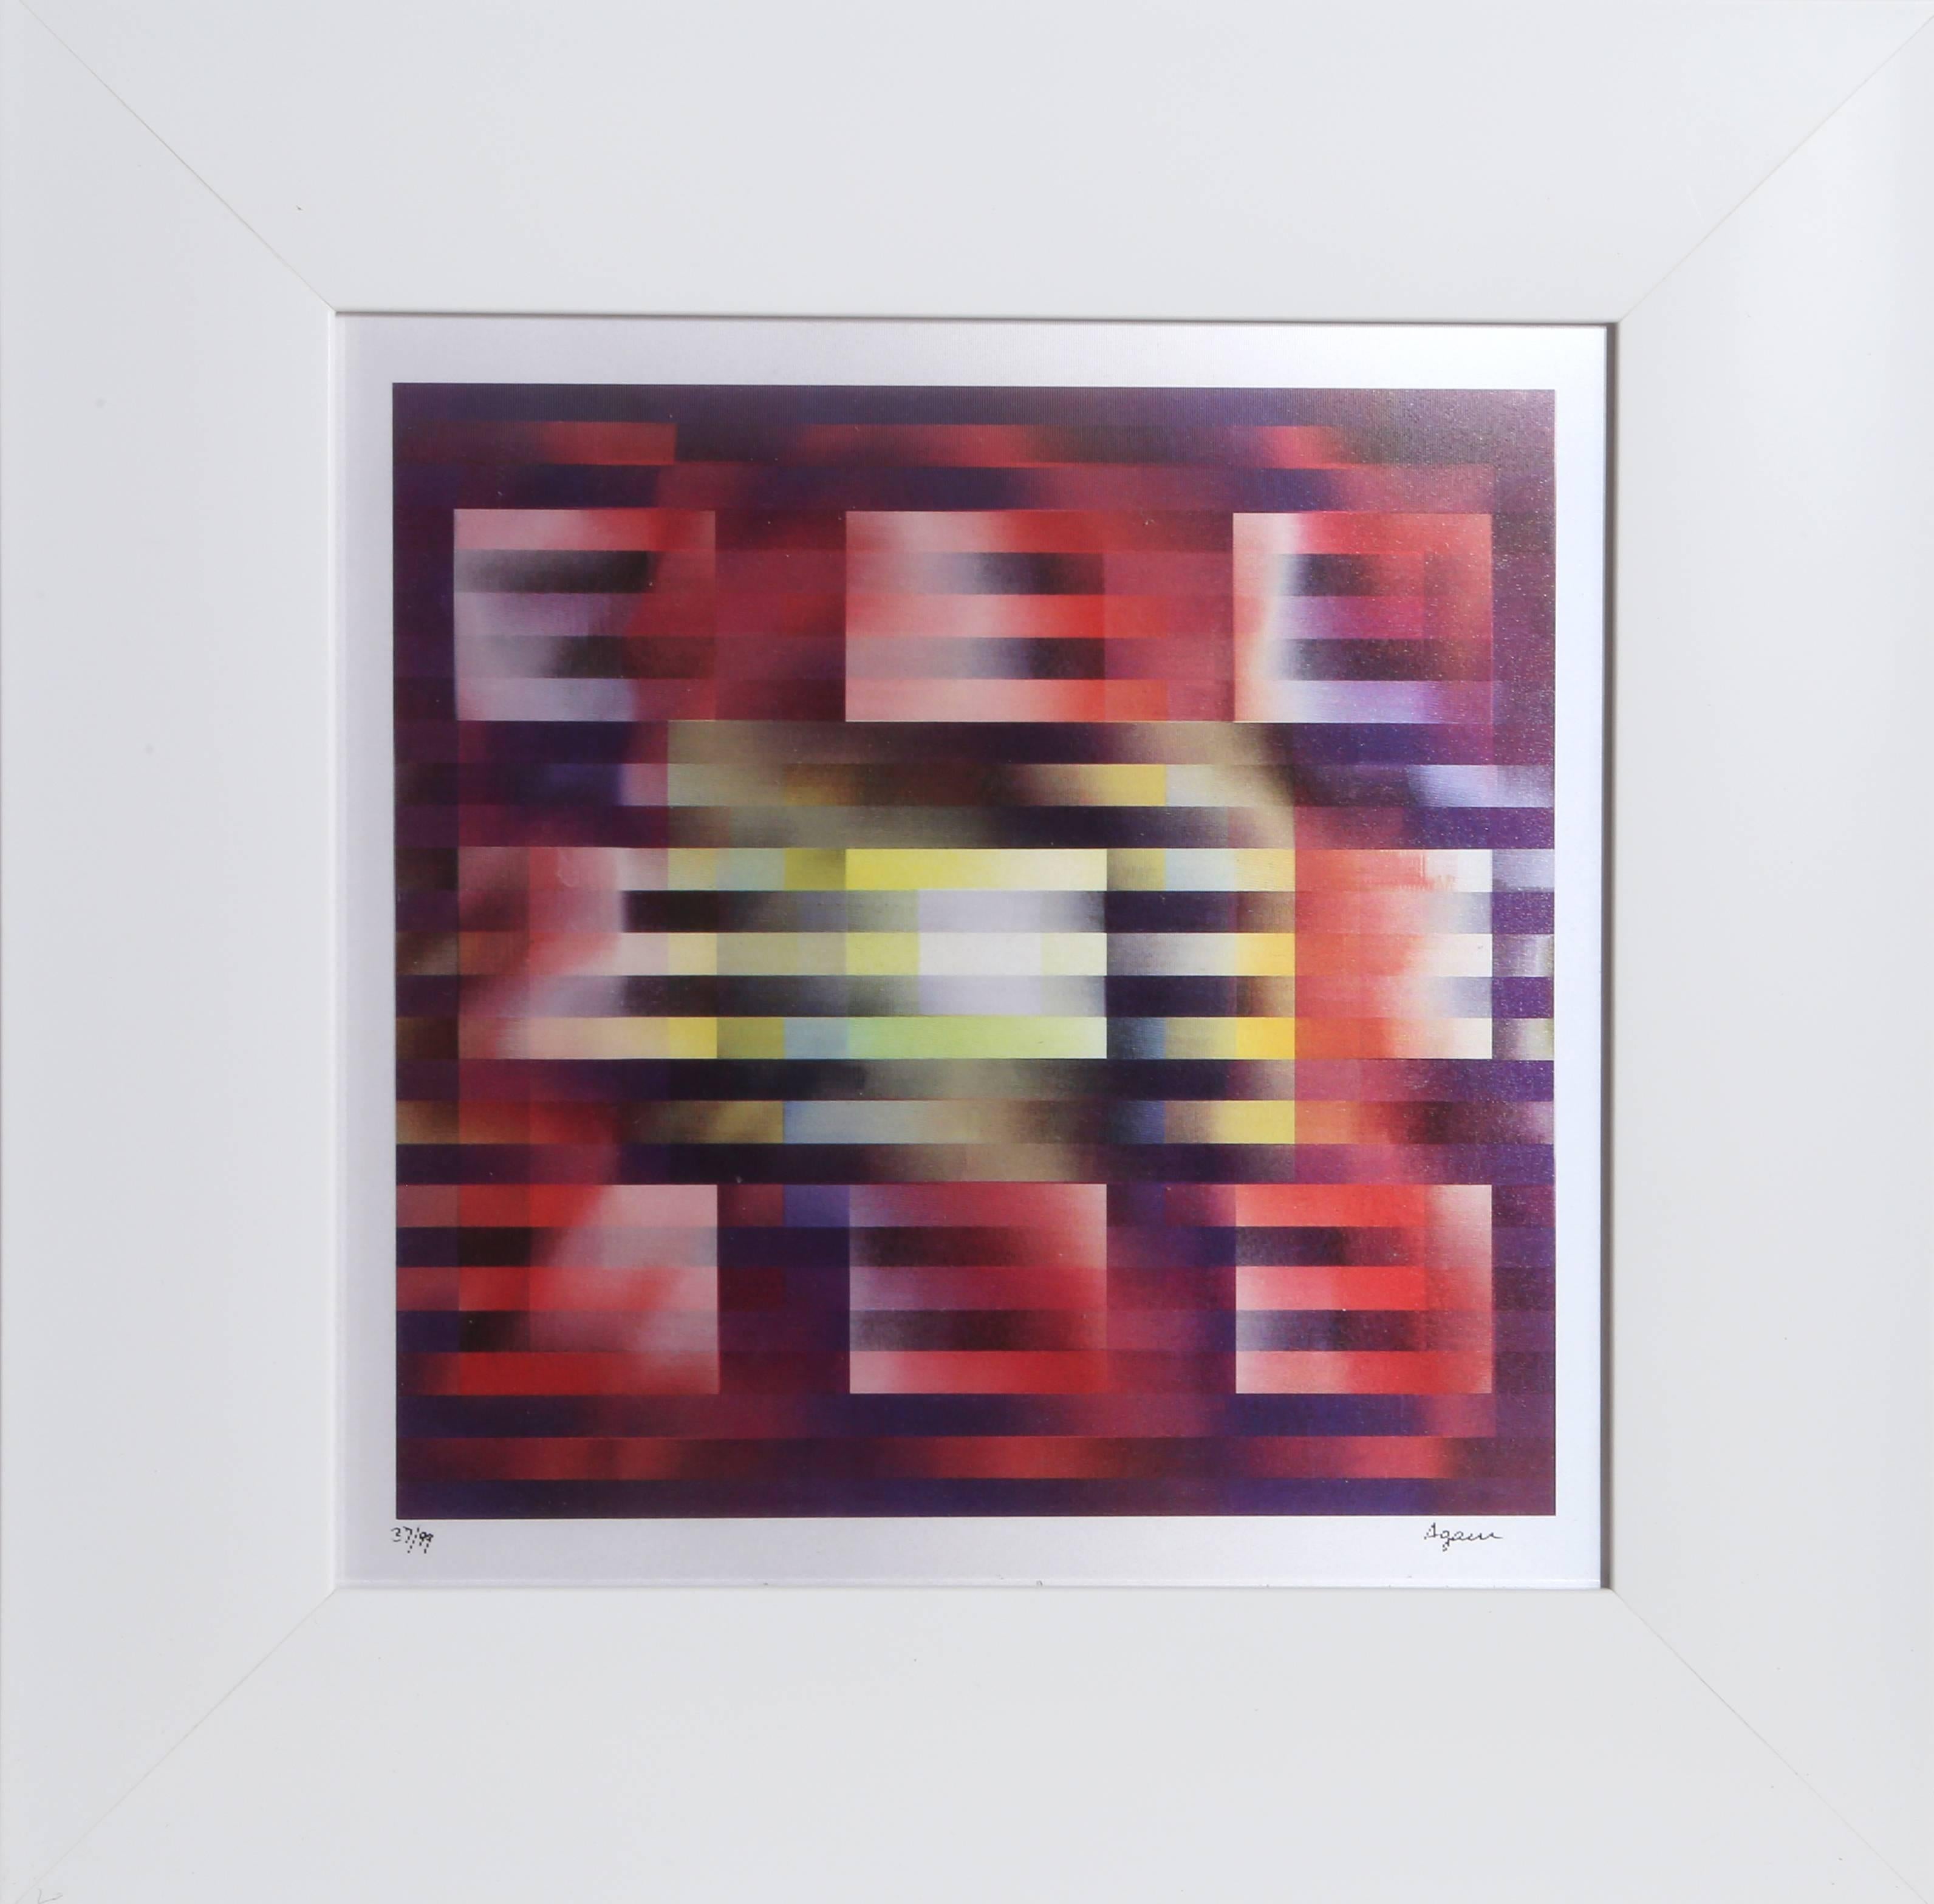 Nine Squares, Abstract Geometric Op Art Agamograph by Yaacov Agam